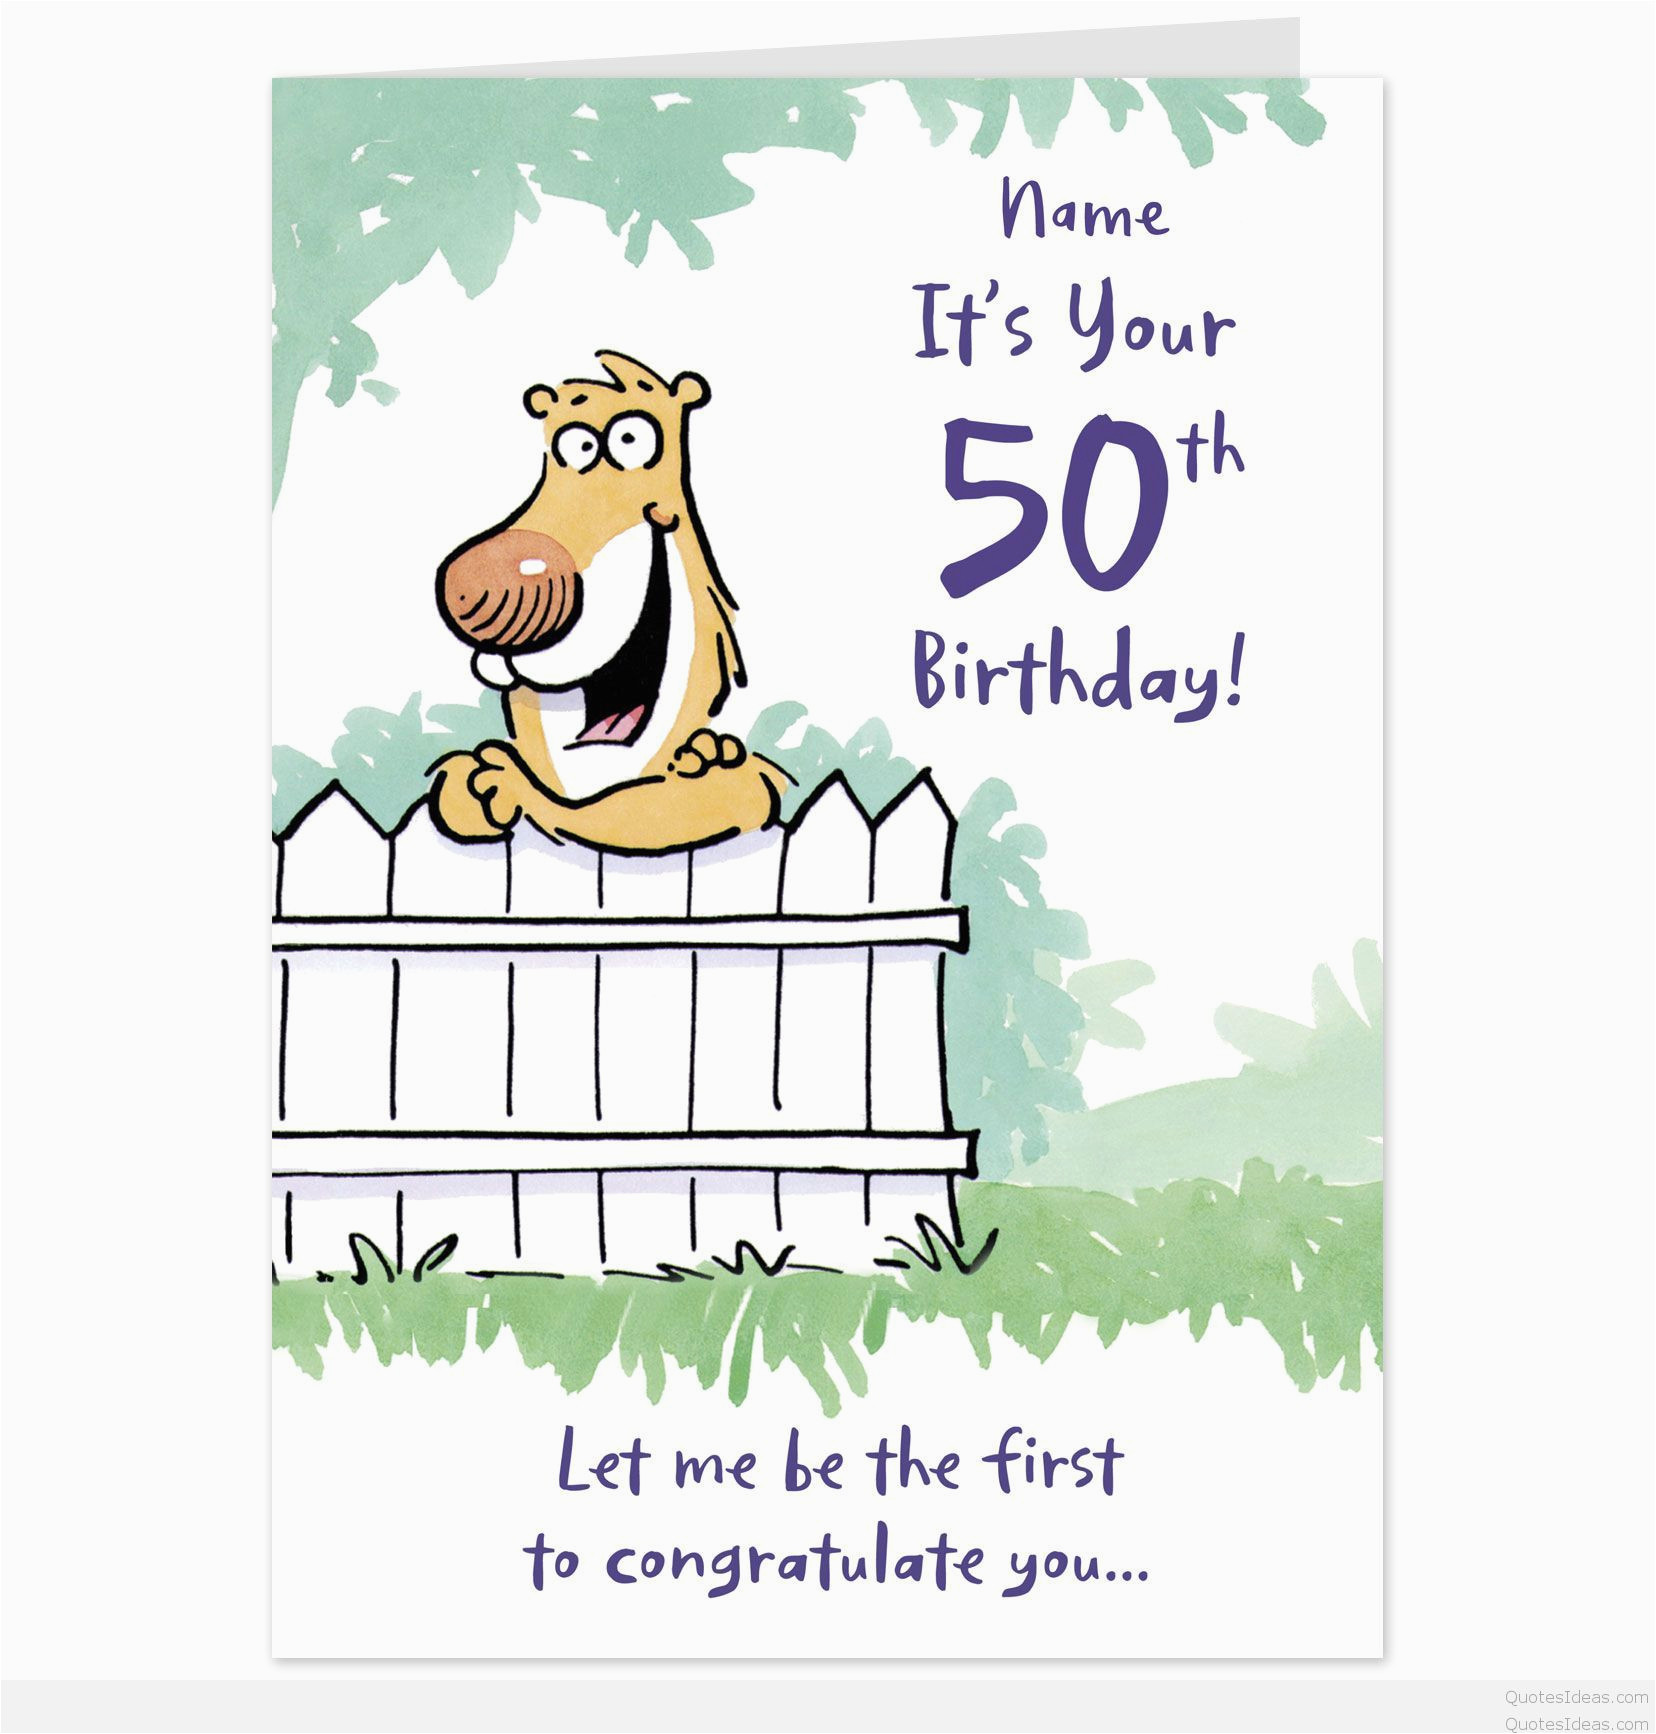 Silly Birthday Quotes
 Funny Birthday Card Verses for Friends